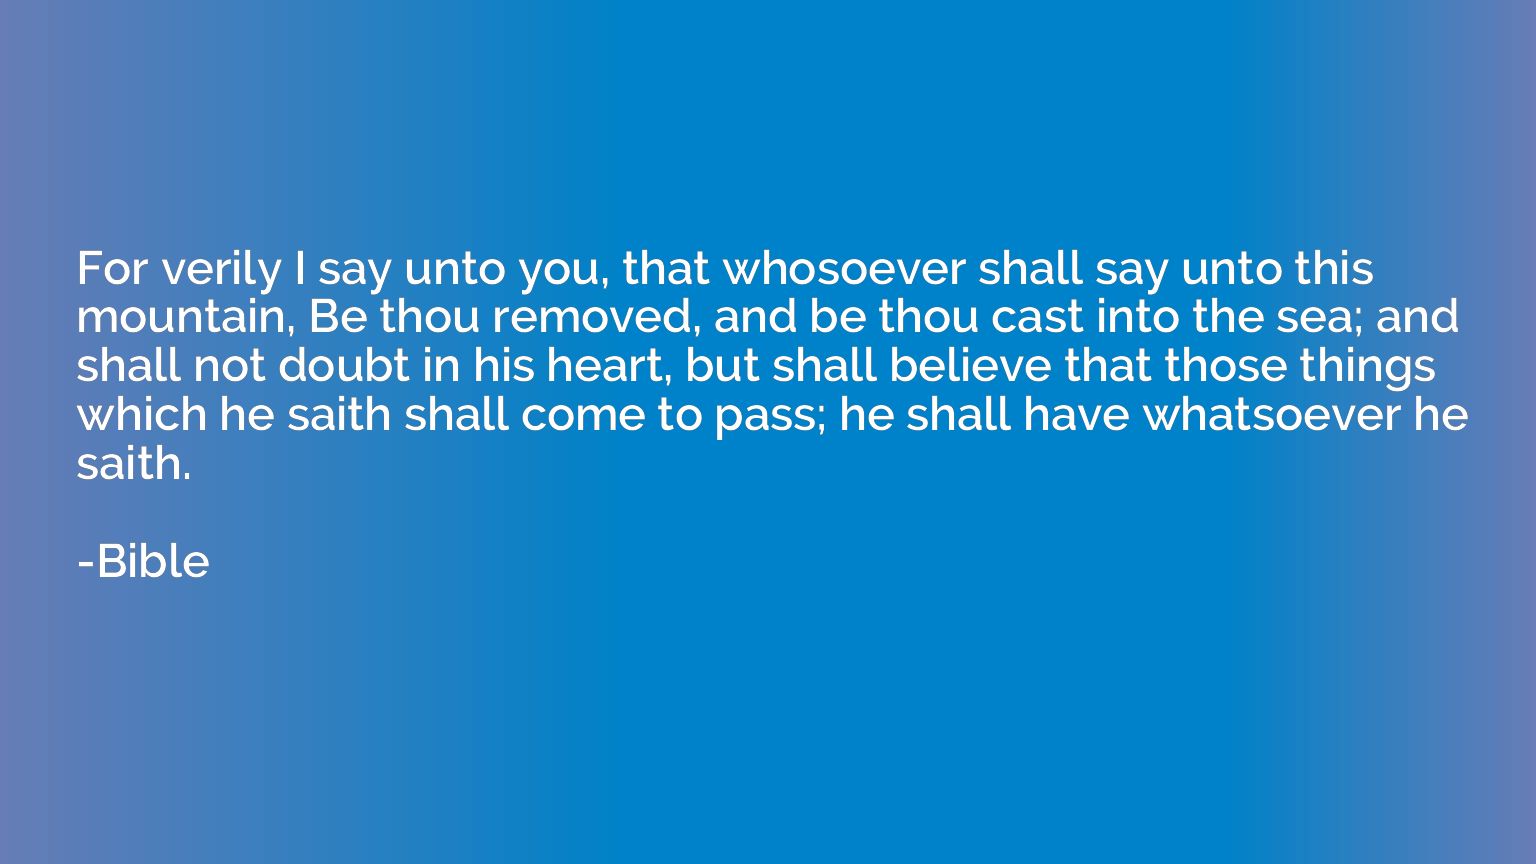 For verily I say unto you, that whosoever shall say unto thi